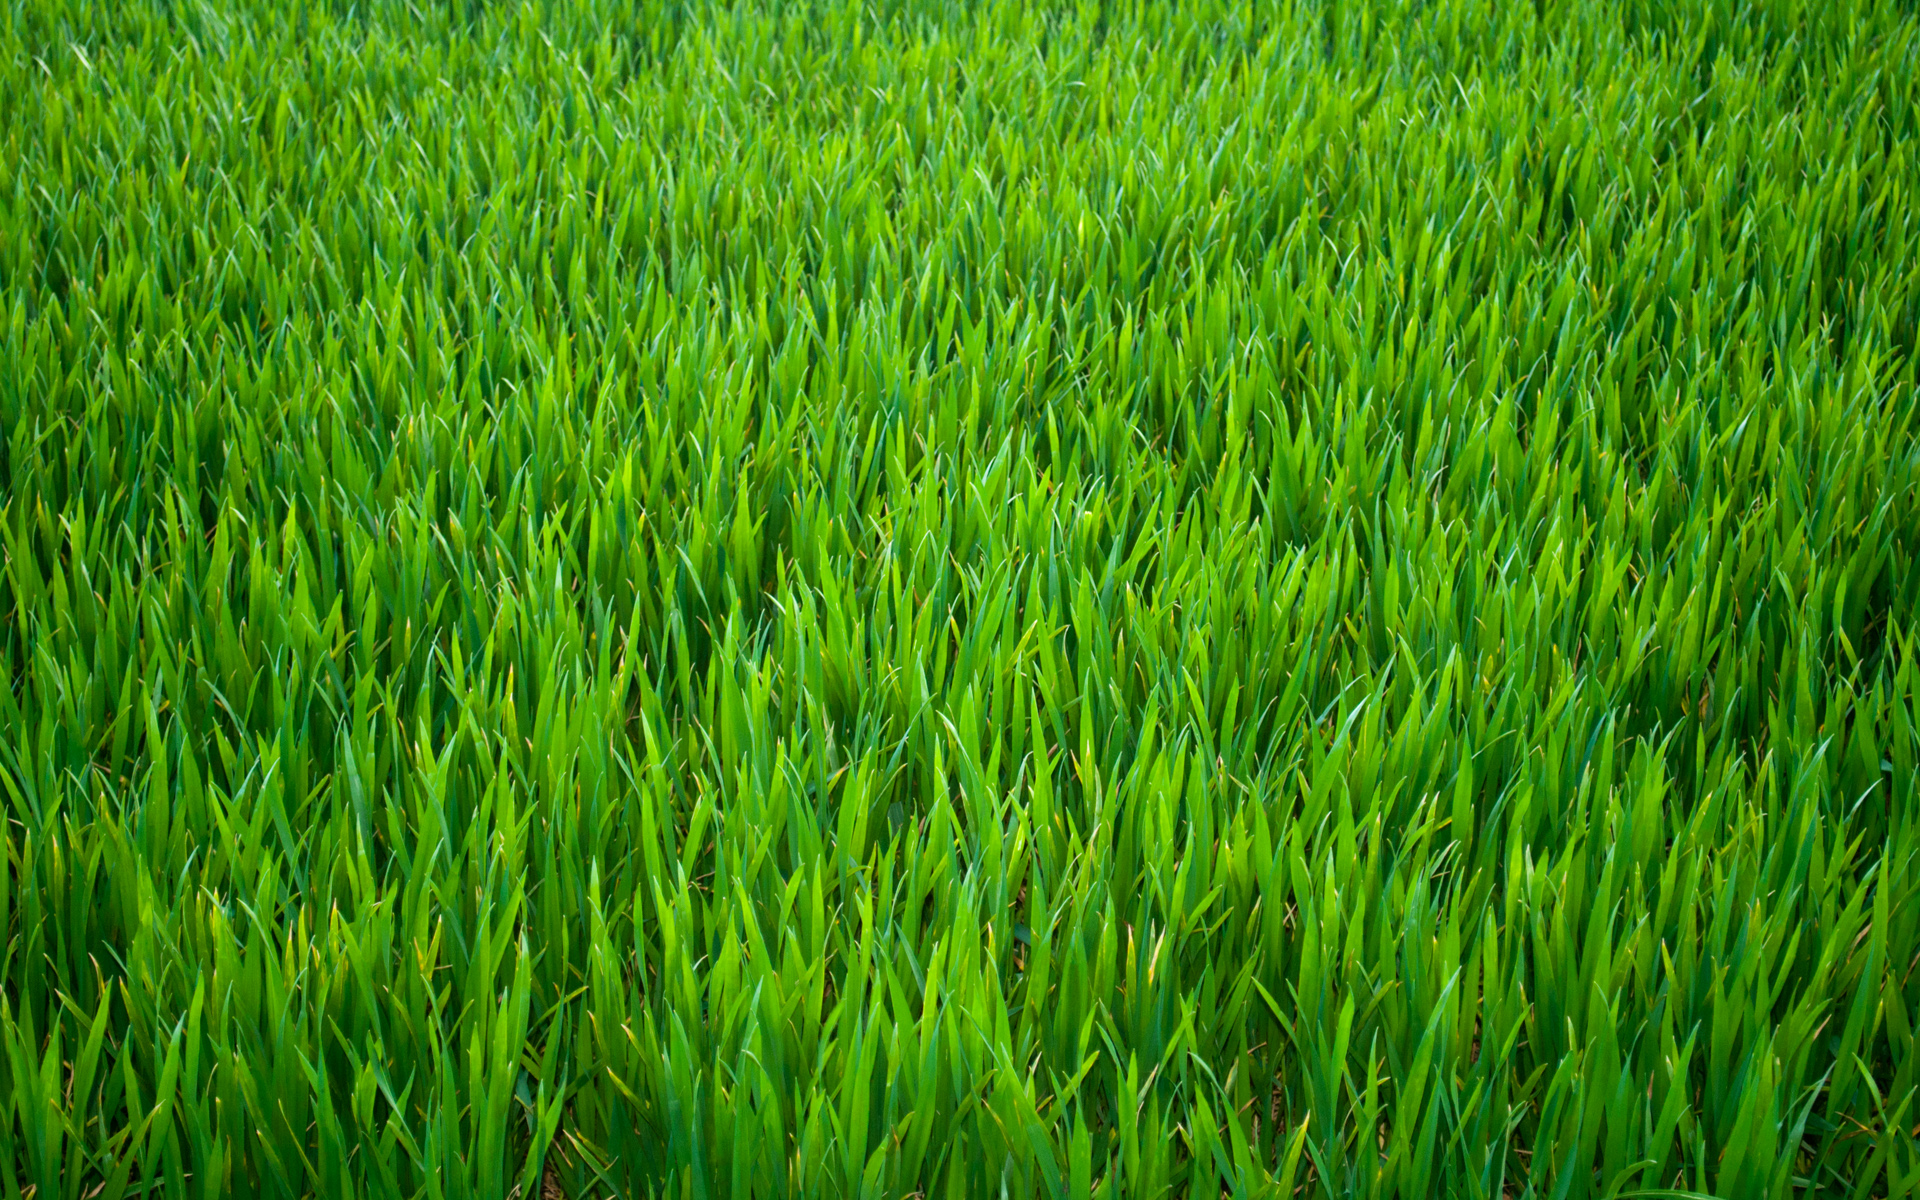 Free download green grass hd wallpaper 7274 7274 [1920x1200] for your